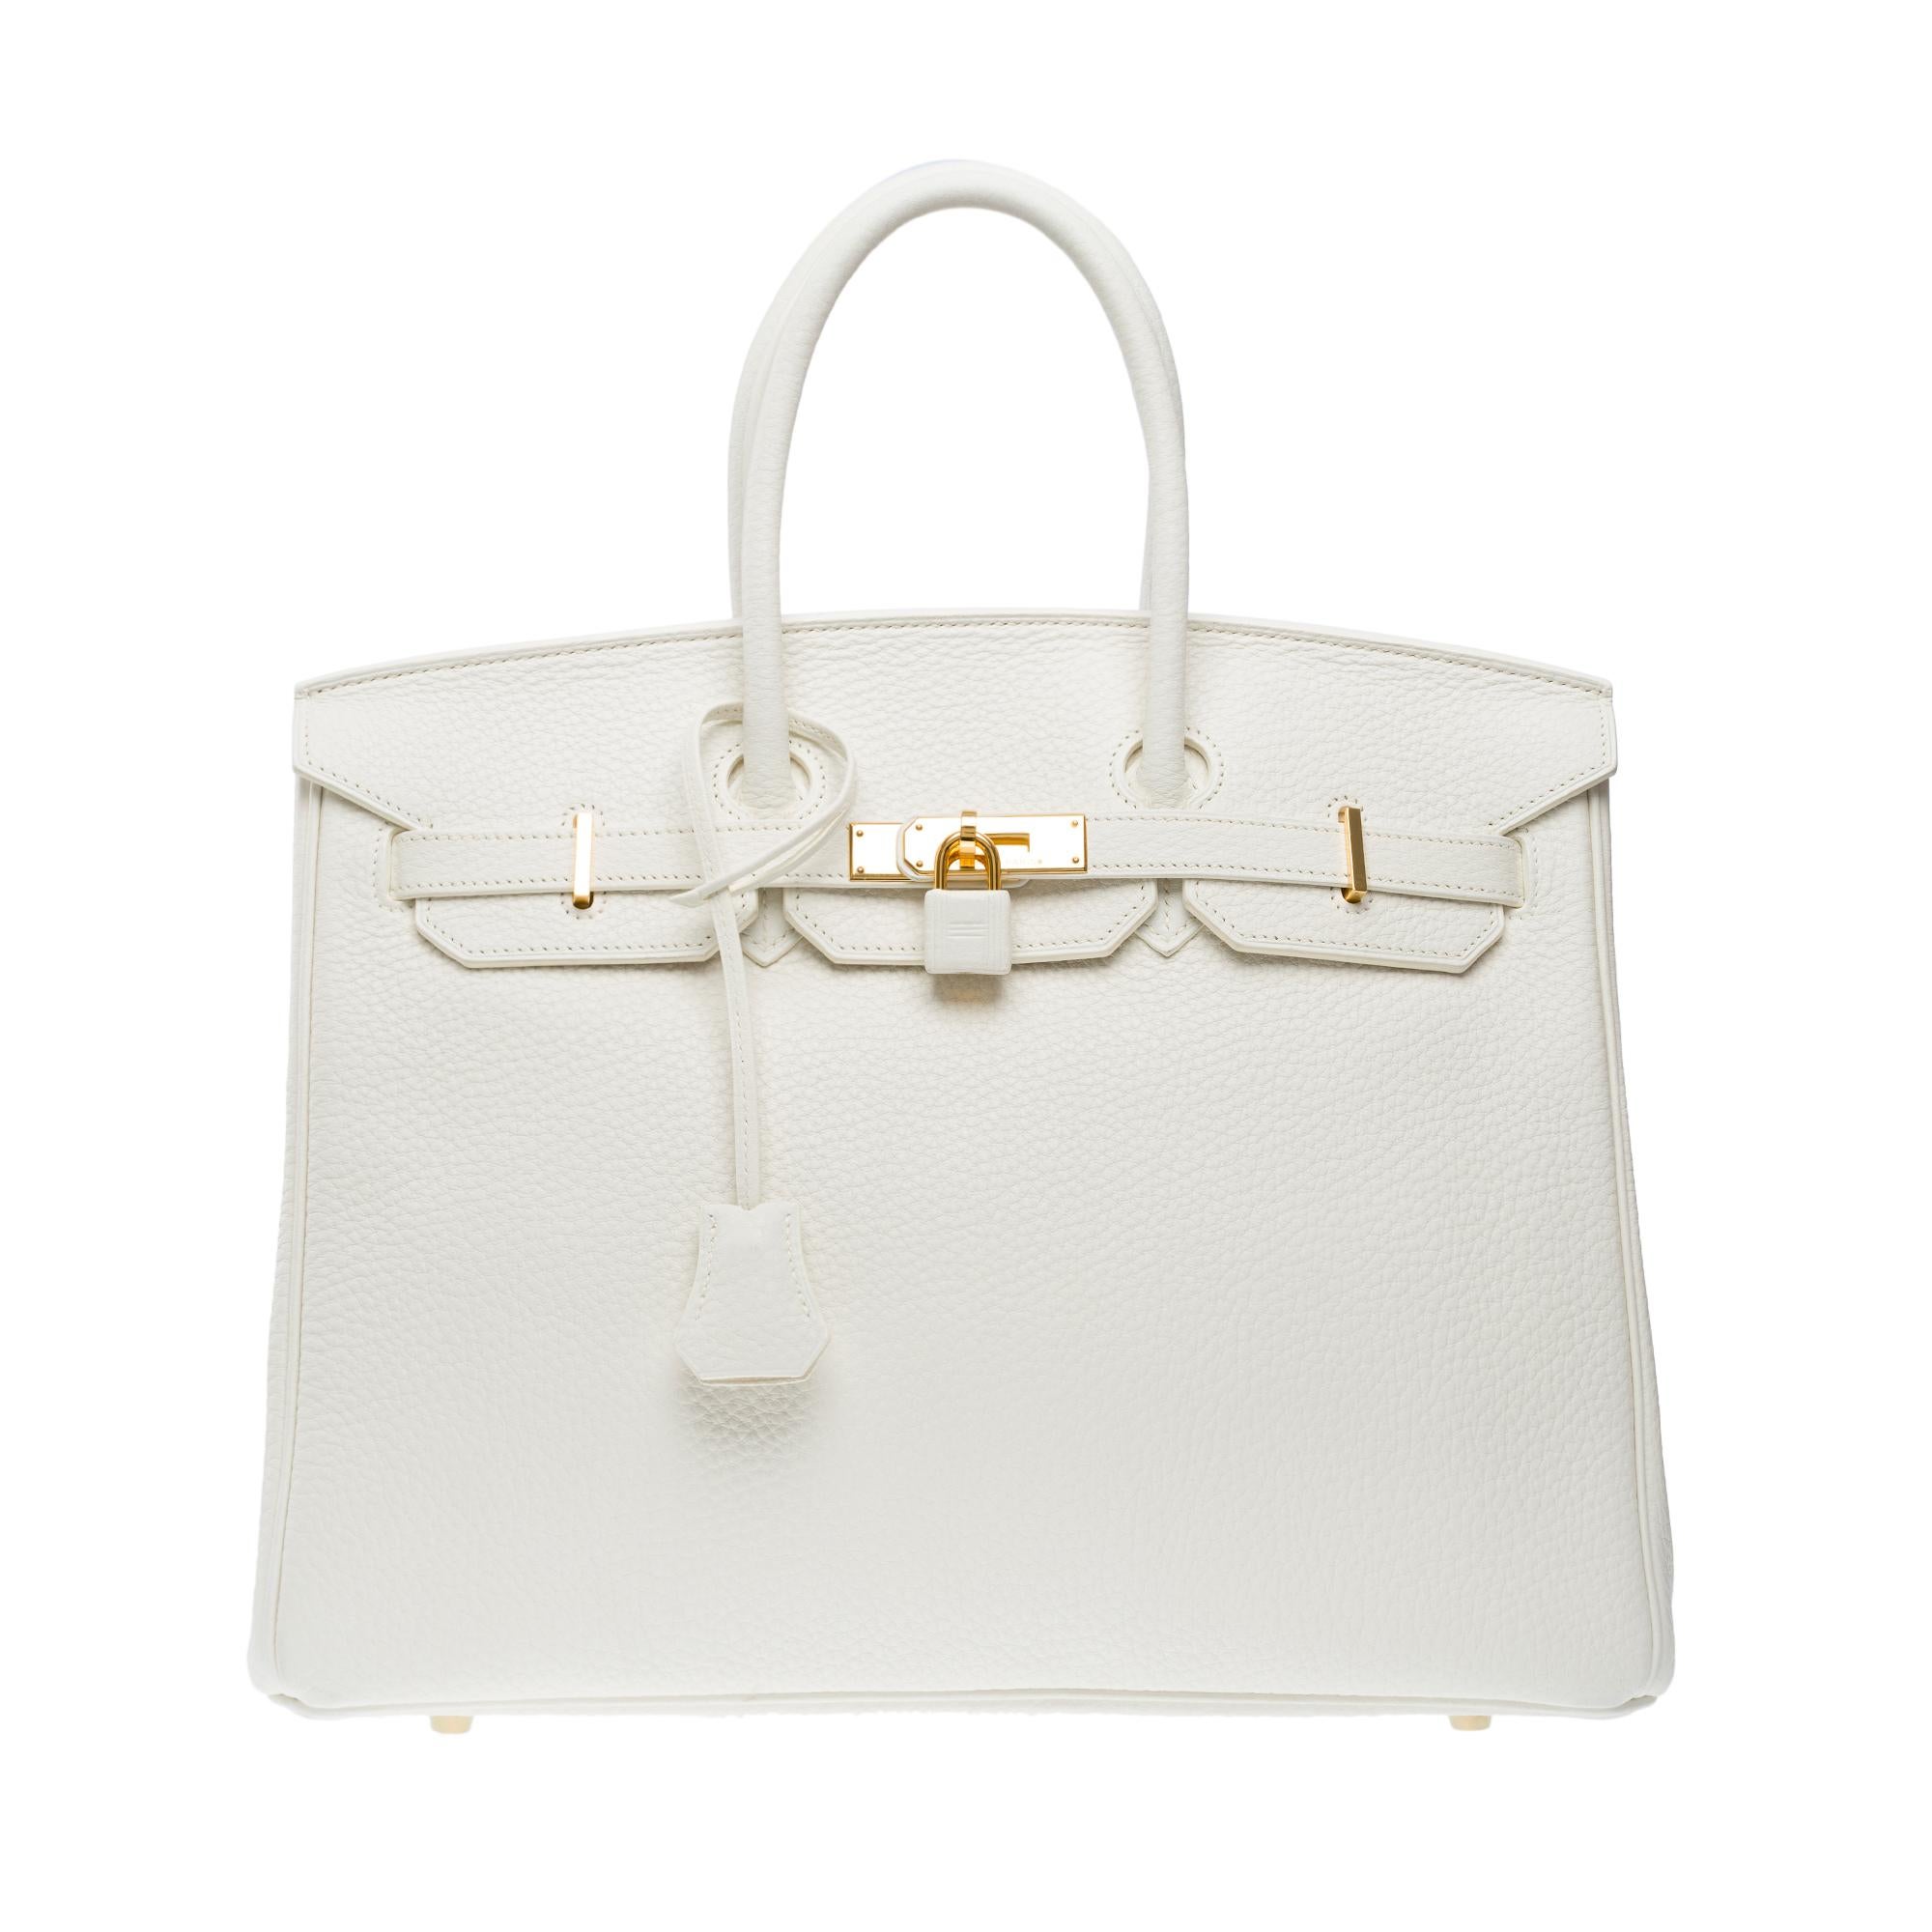 Amazing​ ​Hermes​ ​Birkin​ ​35​ ​handbag​ ​in​ ​White​ ​Taurillon​ ​Clemence​ ​leather,​ ​gold​ ​plated​ ​metal​ ​trim,​ ​double​ ​handle​ ​in​ ​white​ ​leather​ ​allowing​ ​a​ ​hand​ ​carry

Flap​ ​closure
White​ ​leather​ ​inner​ ​lining,​ ​a​